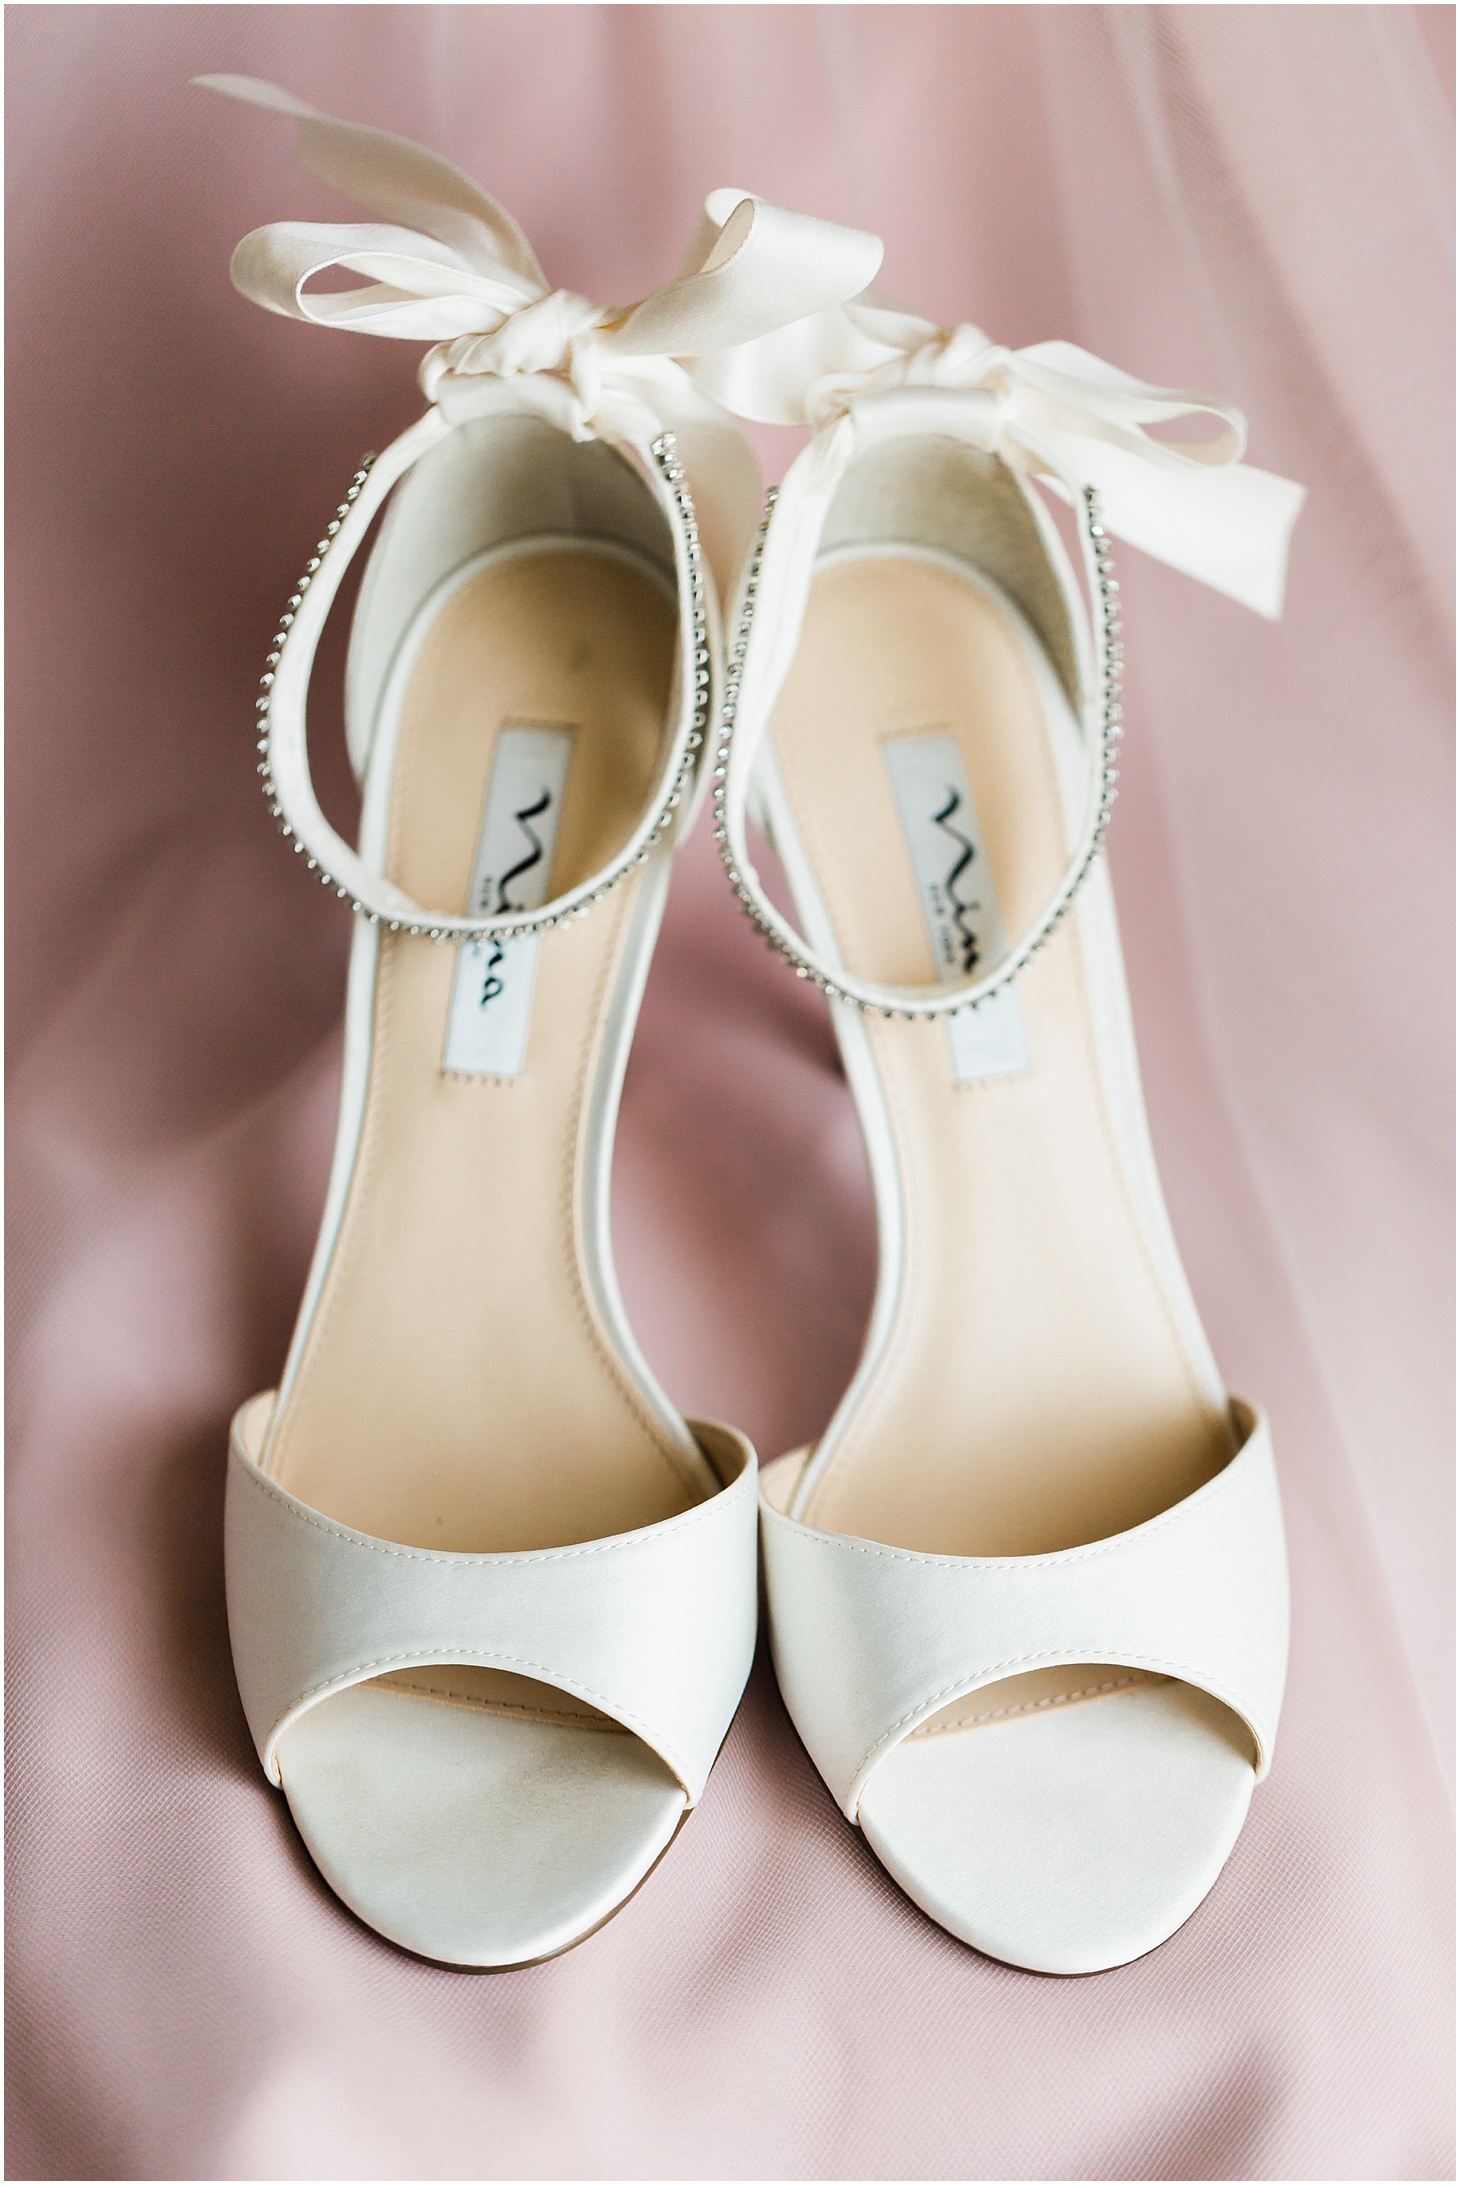 Nina Crystal Embellished Ankle Strap Heels, Navy and Blush Summer Wedding at the Army and Navy Club, Ceremony at Capitol Hill Baptist Church Sarah Bradshaw Photography, DC Wedding Photographer